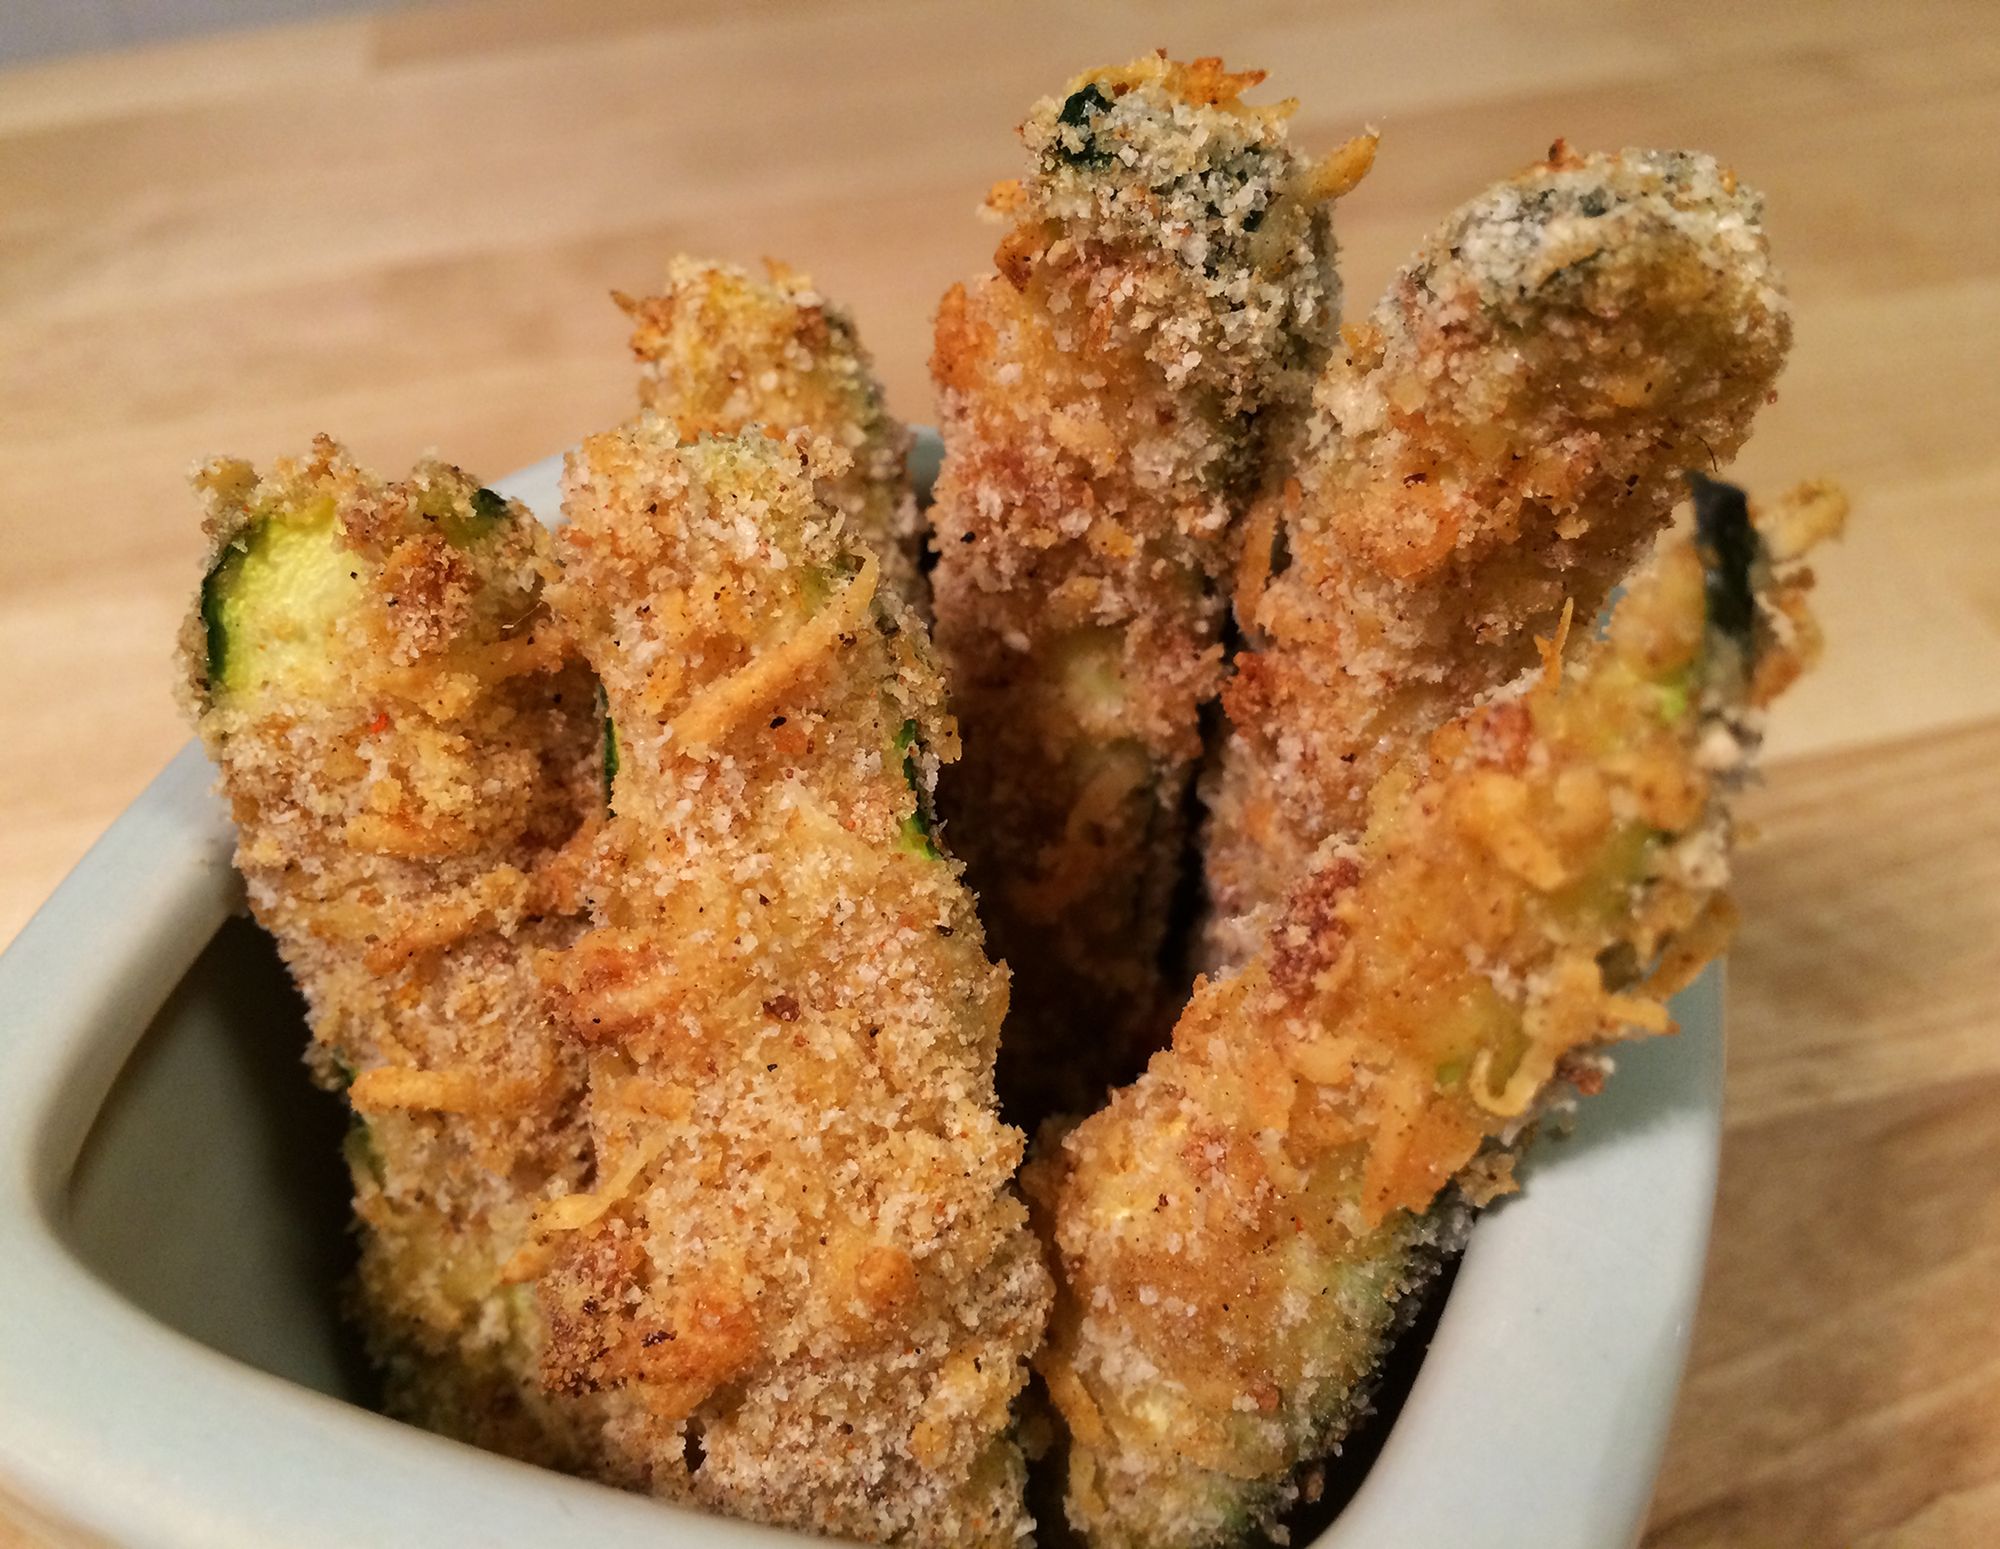 Zucchini fries with parmesan